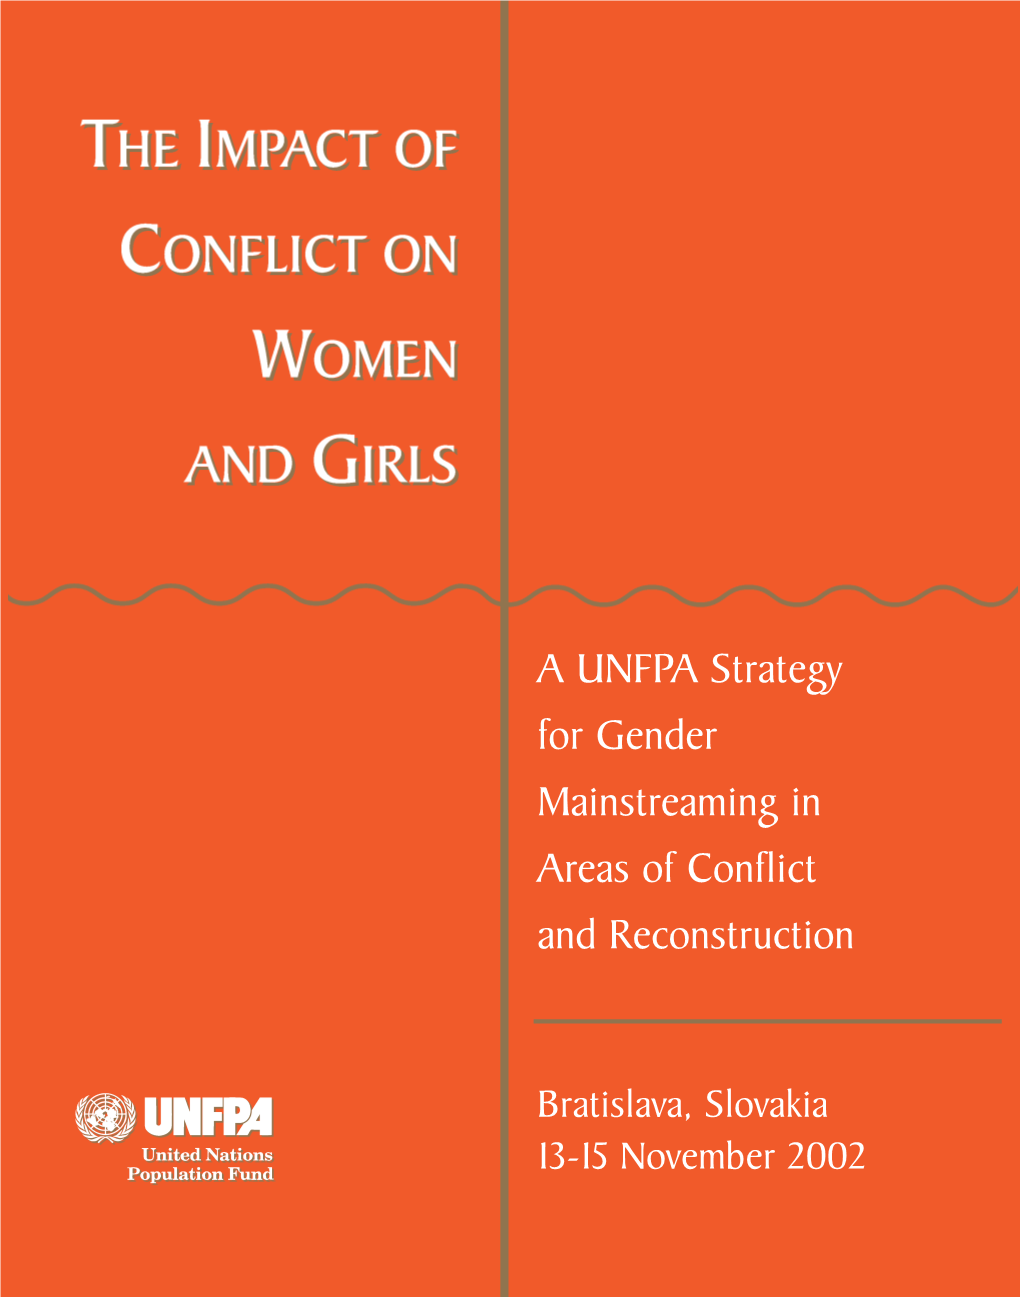 The Impact of Armed Conflict on Women and Girls